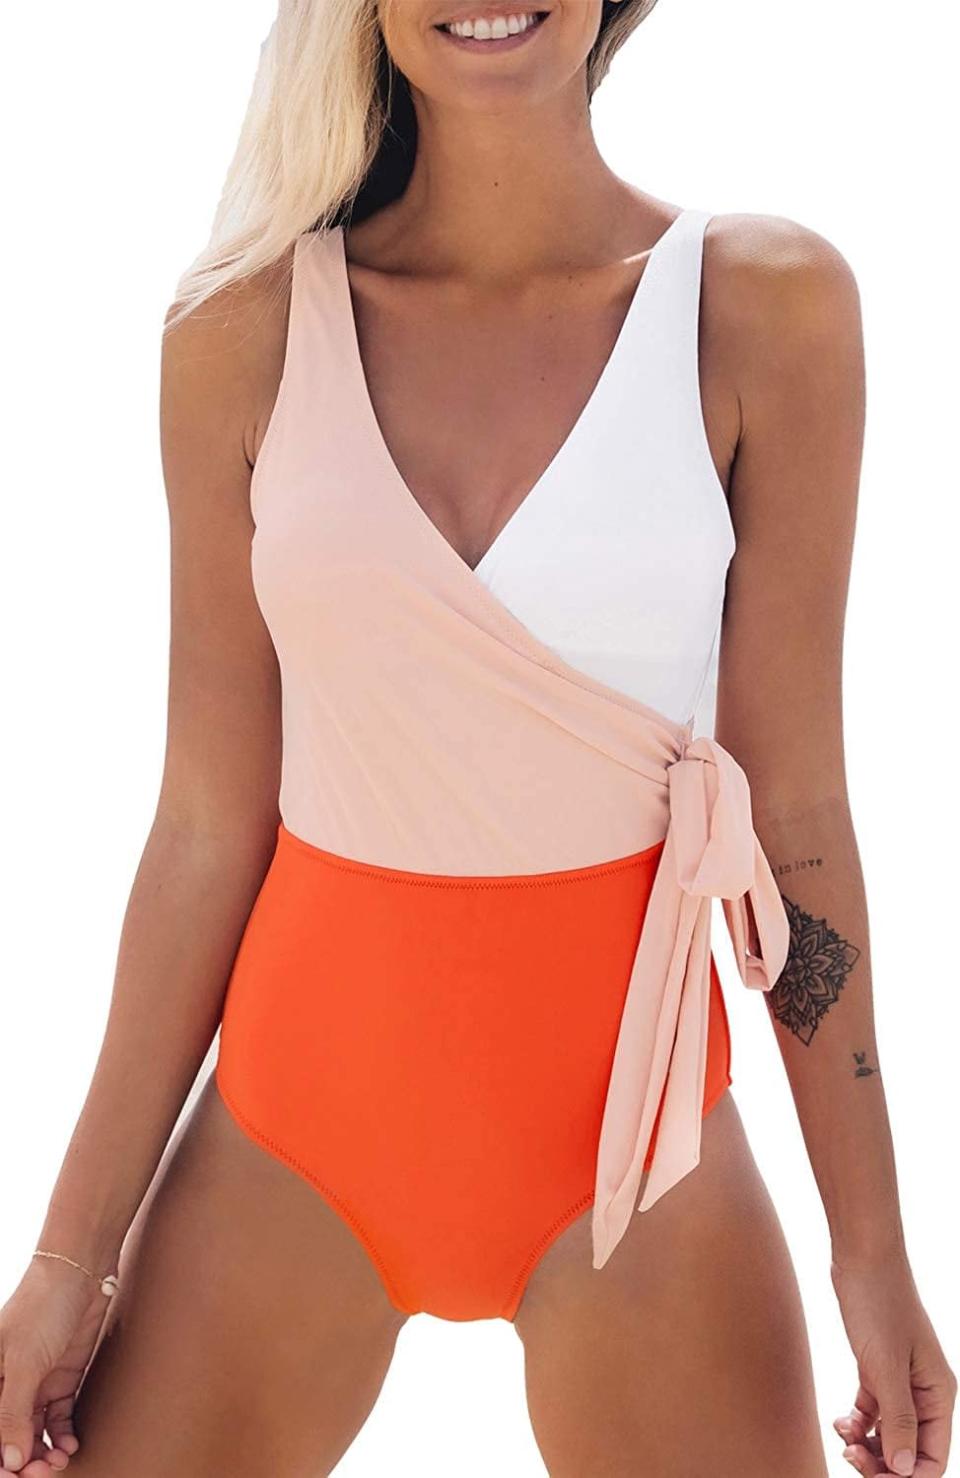 <p>Cupshe has emerged as one of Amazon's best-selling swimwear brands - and this <span>Cupshe One Piece Swimsuit</span> ($23, originally $33) is an especially cute style, thanks to its wraparound design. Still not sold on the piece yet? Just browse through the thousands of rave reviews on Amazon for further proof that this is <em>the</em> swimsuit to have this summer.</p>